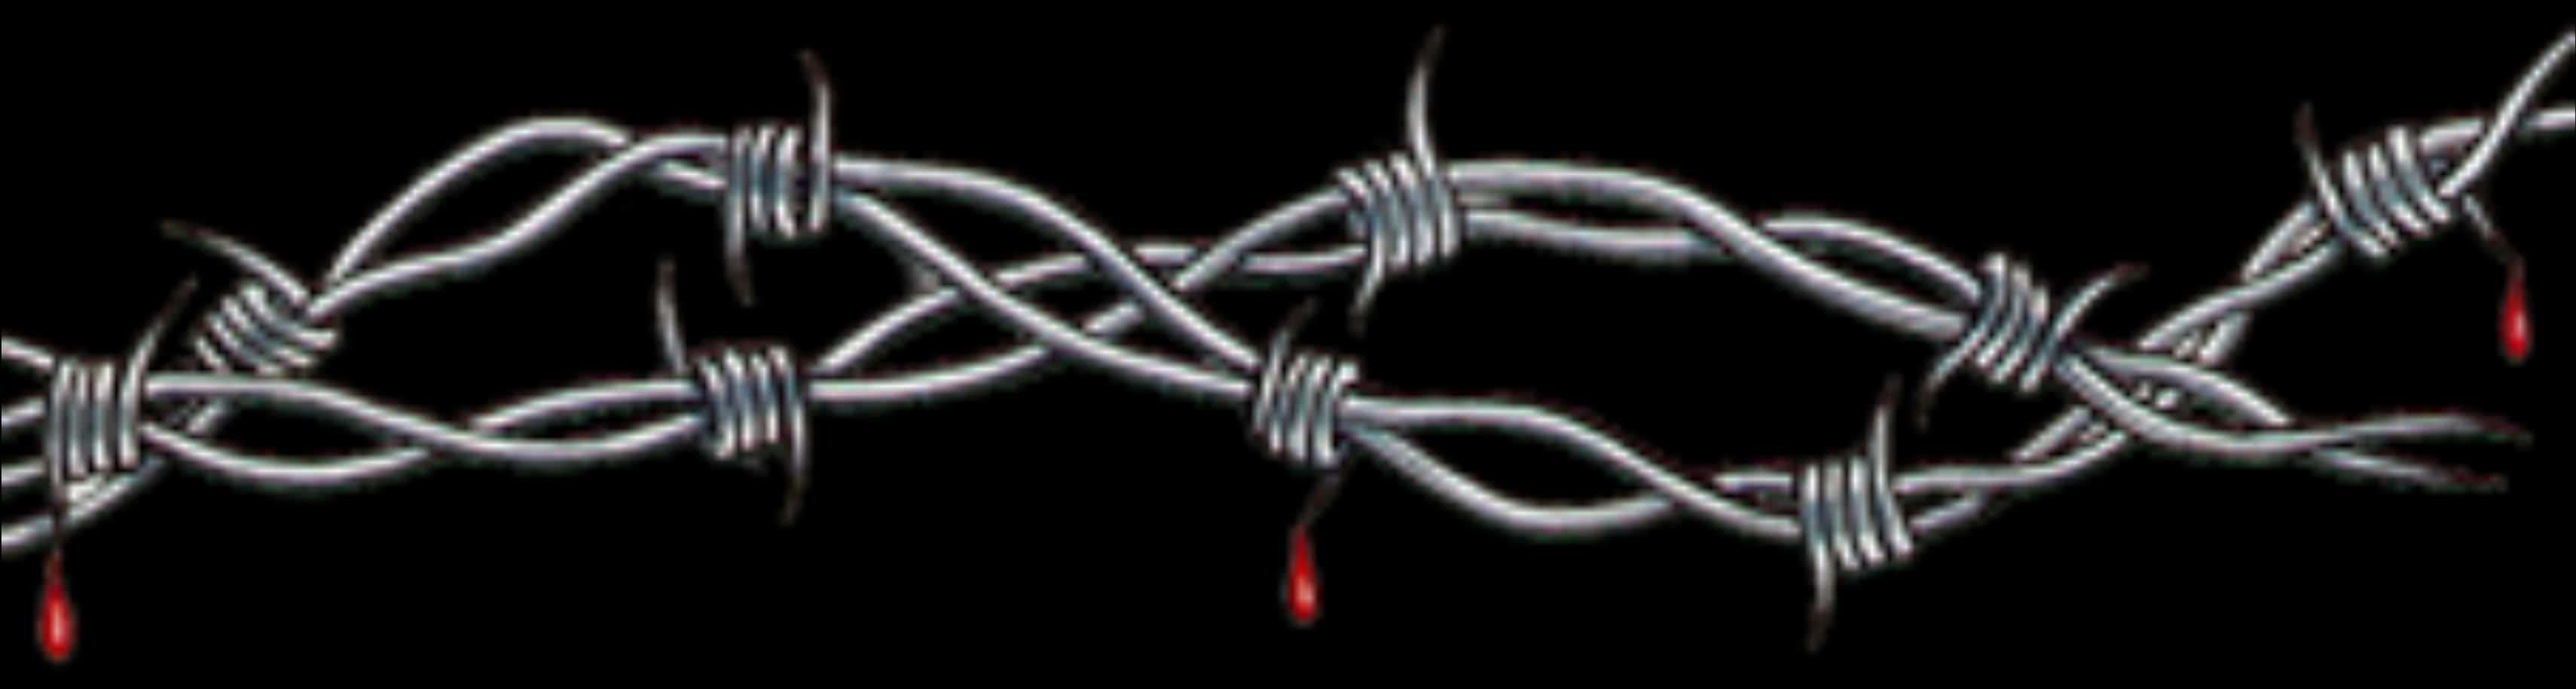 A Close-up Of Barbed Wire